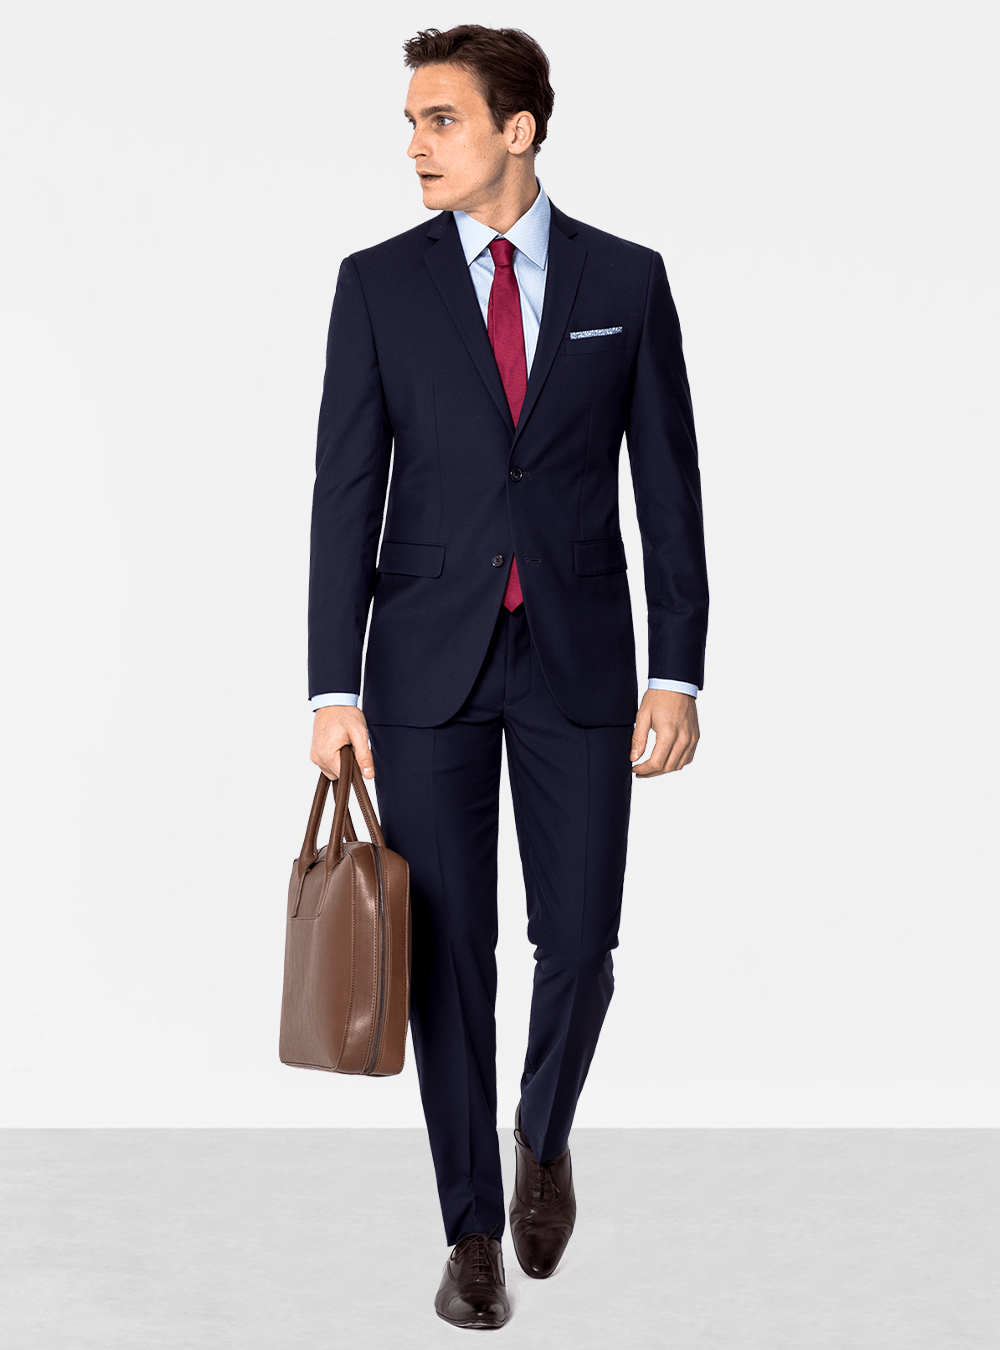 Navy suit, light blue dress shirt, red tie and brown oxford shoes